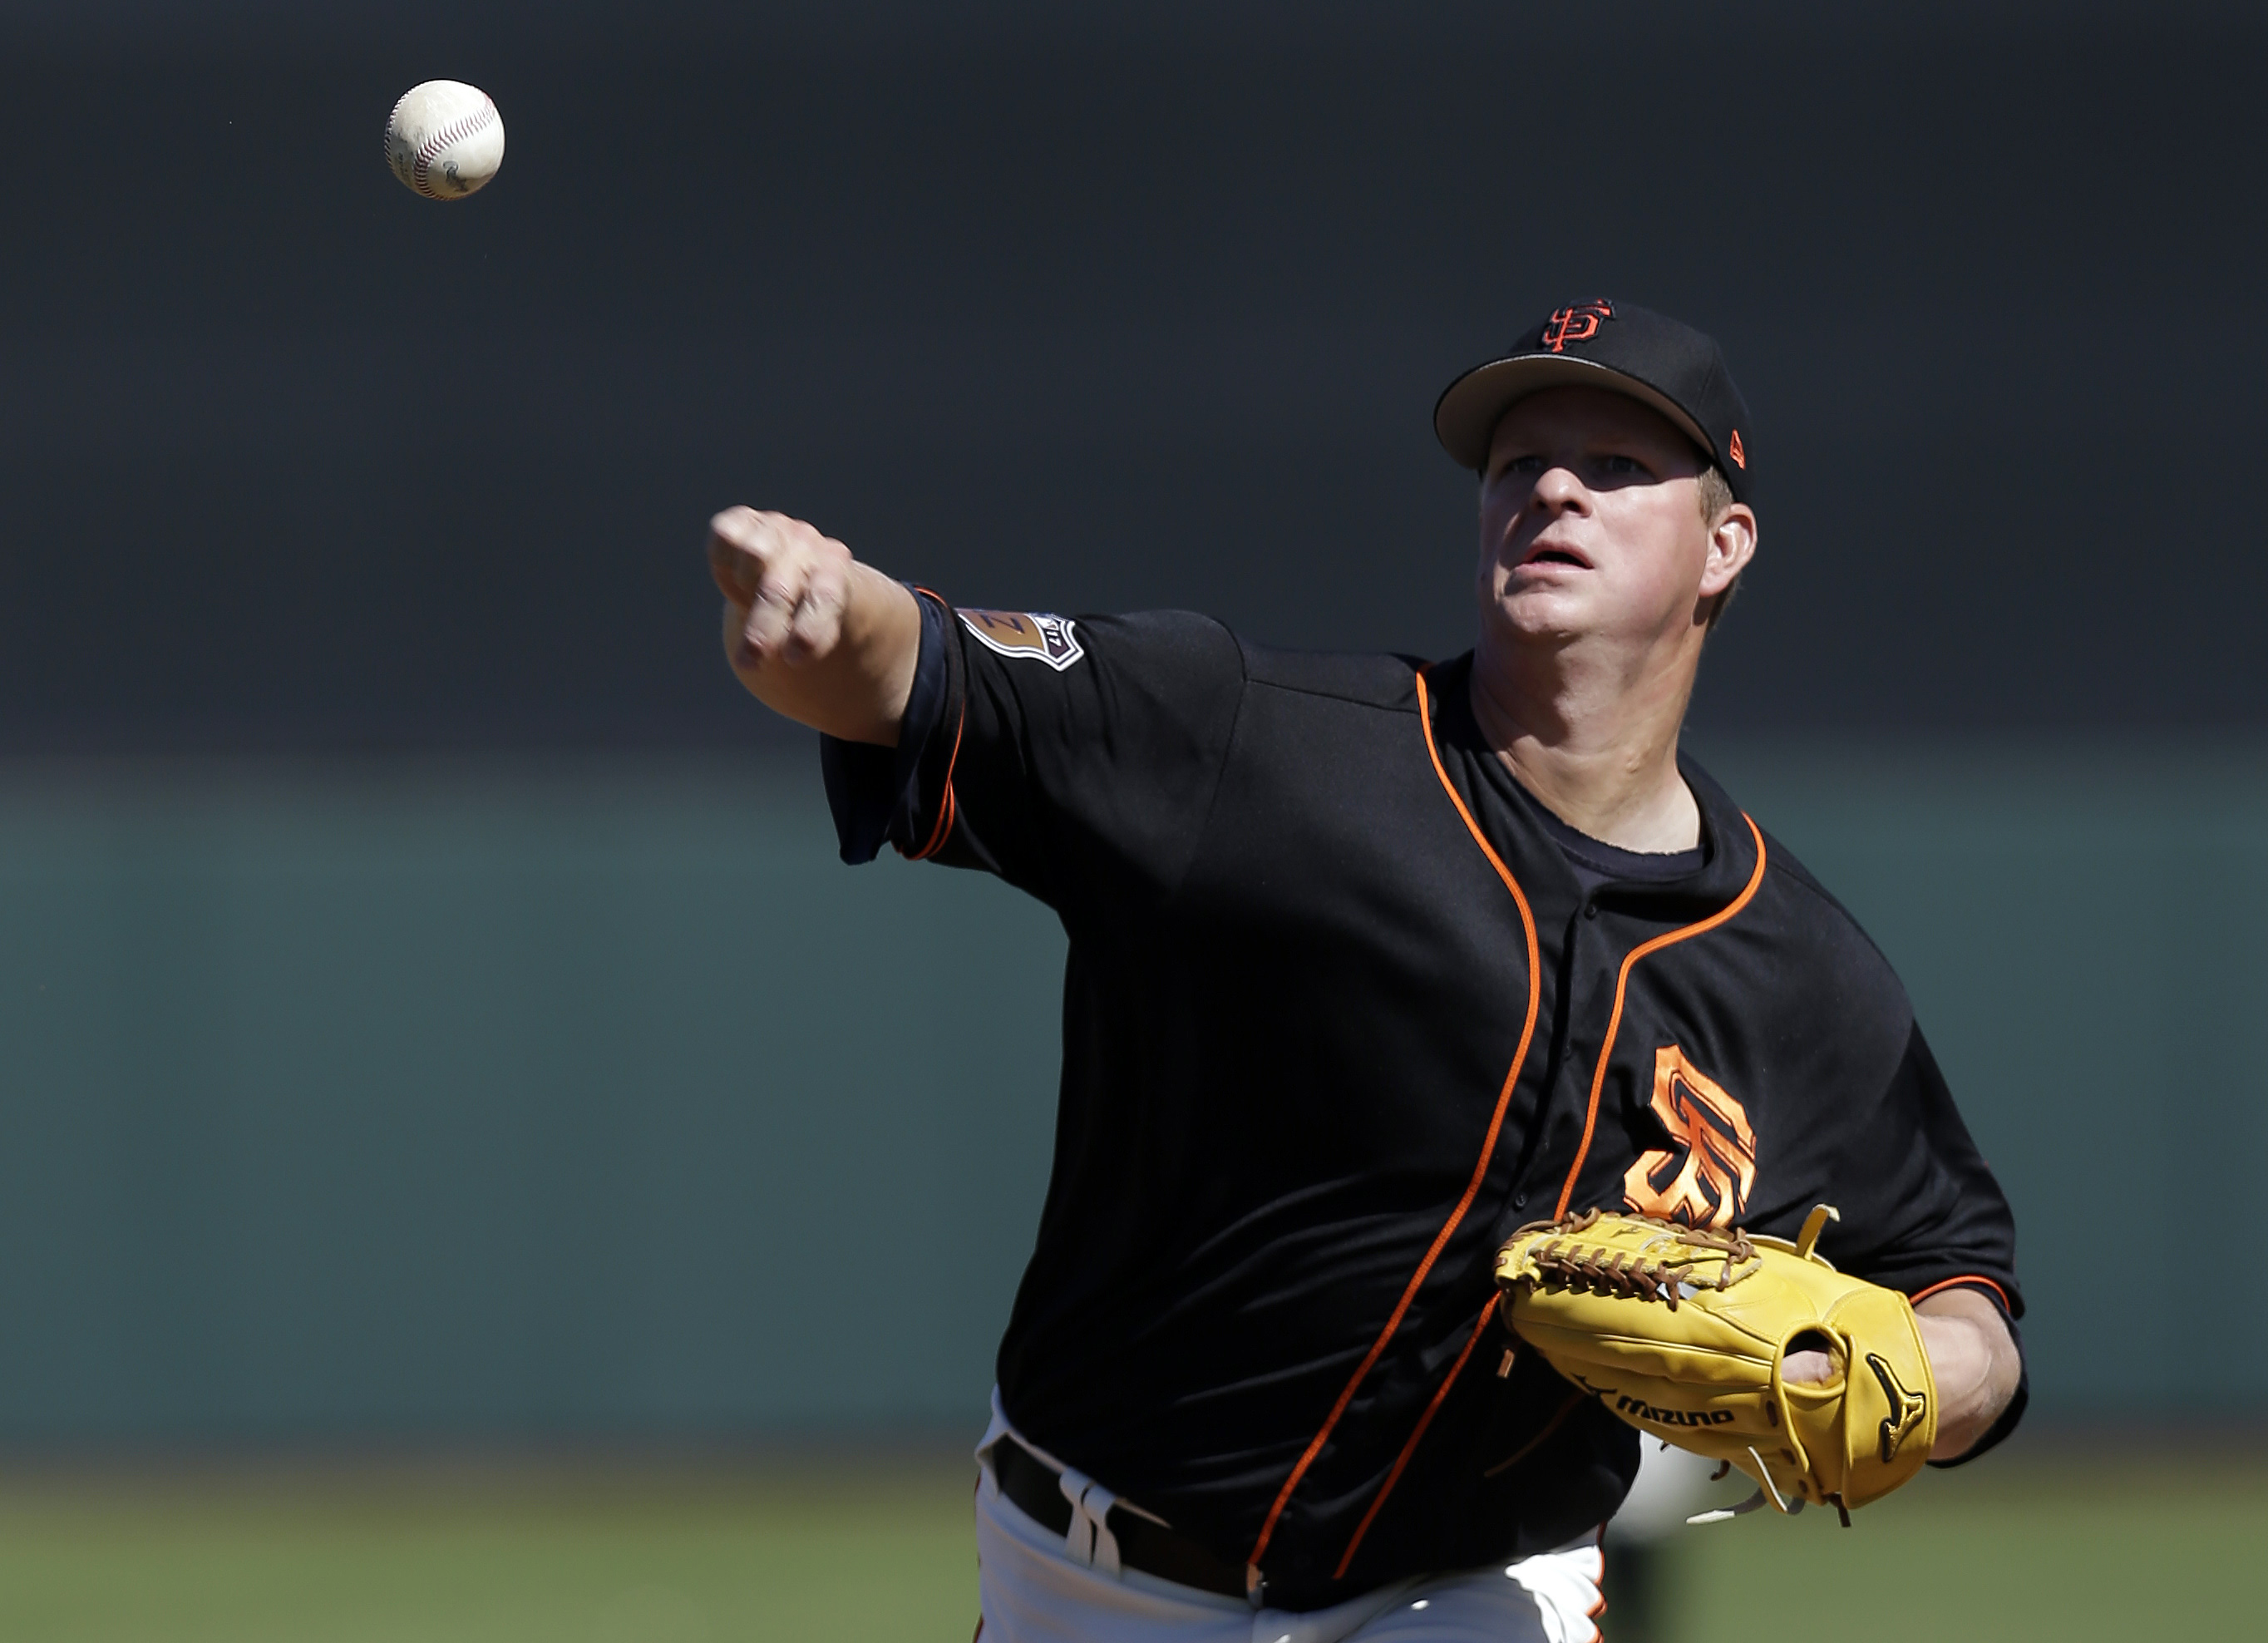 MLB: Spring Training-Chicago Cubs at San Francisco Giants